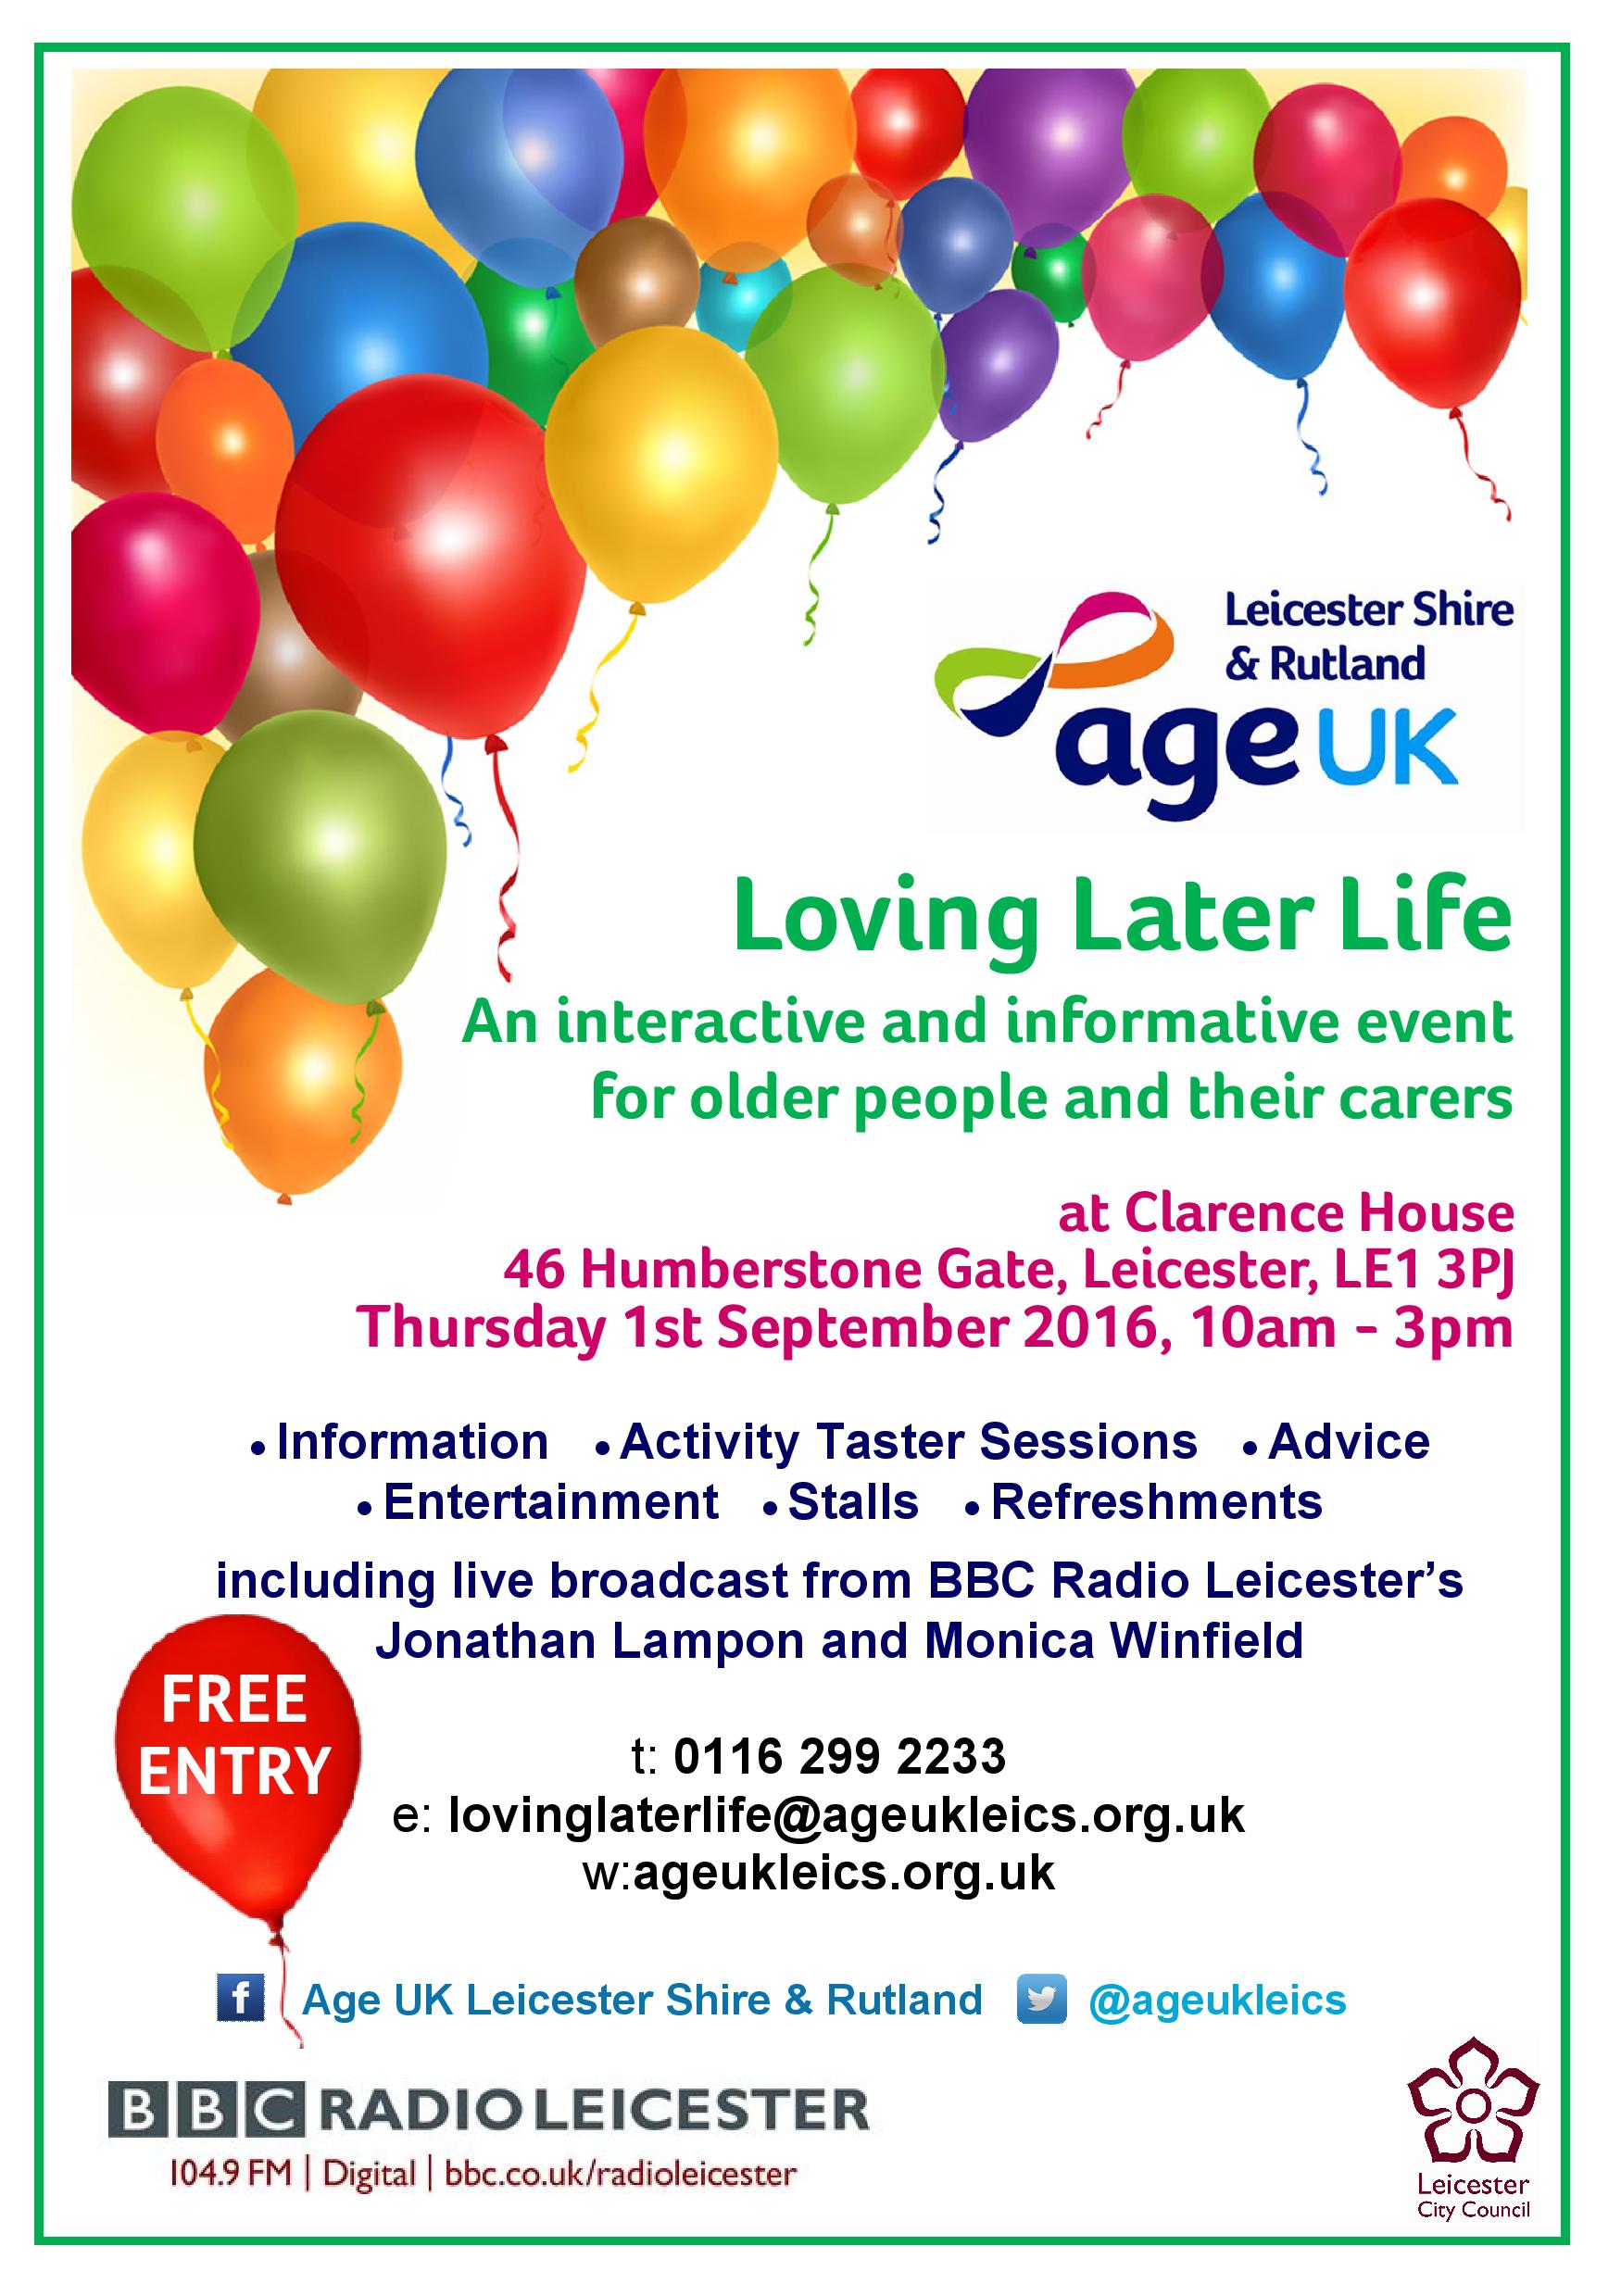 An interactive and informative event for older people and their carers